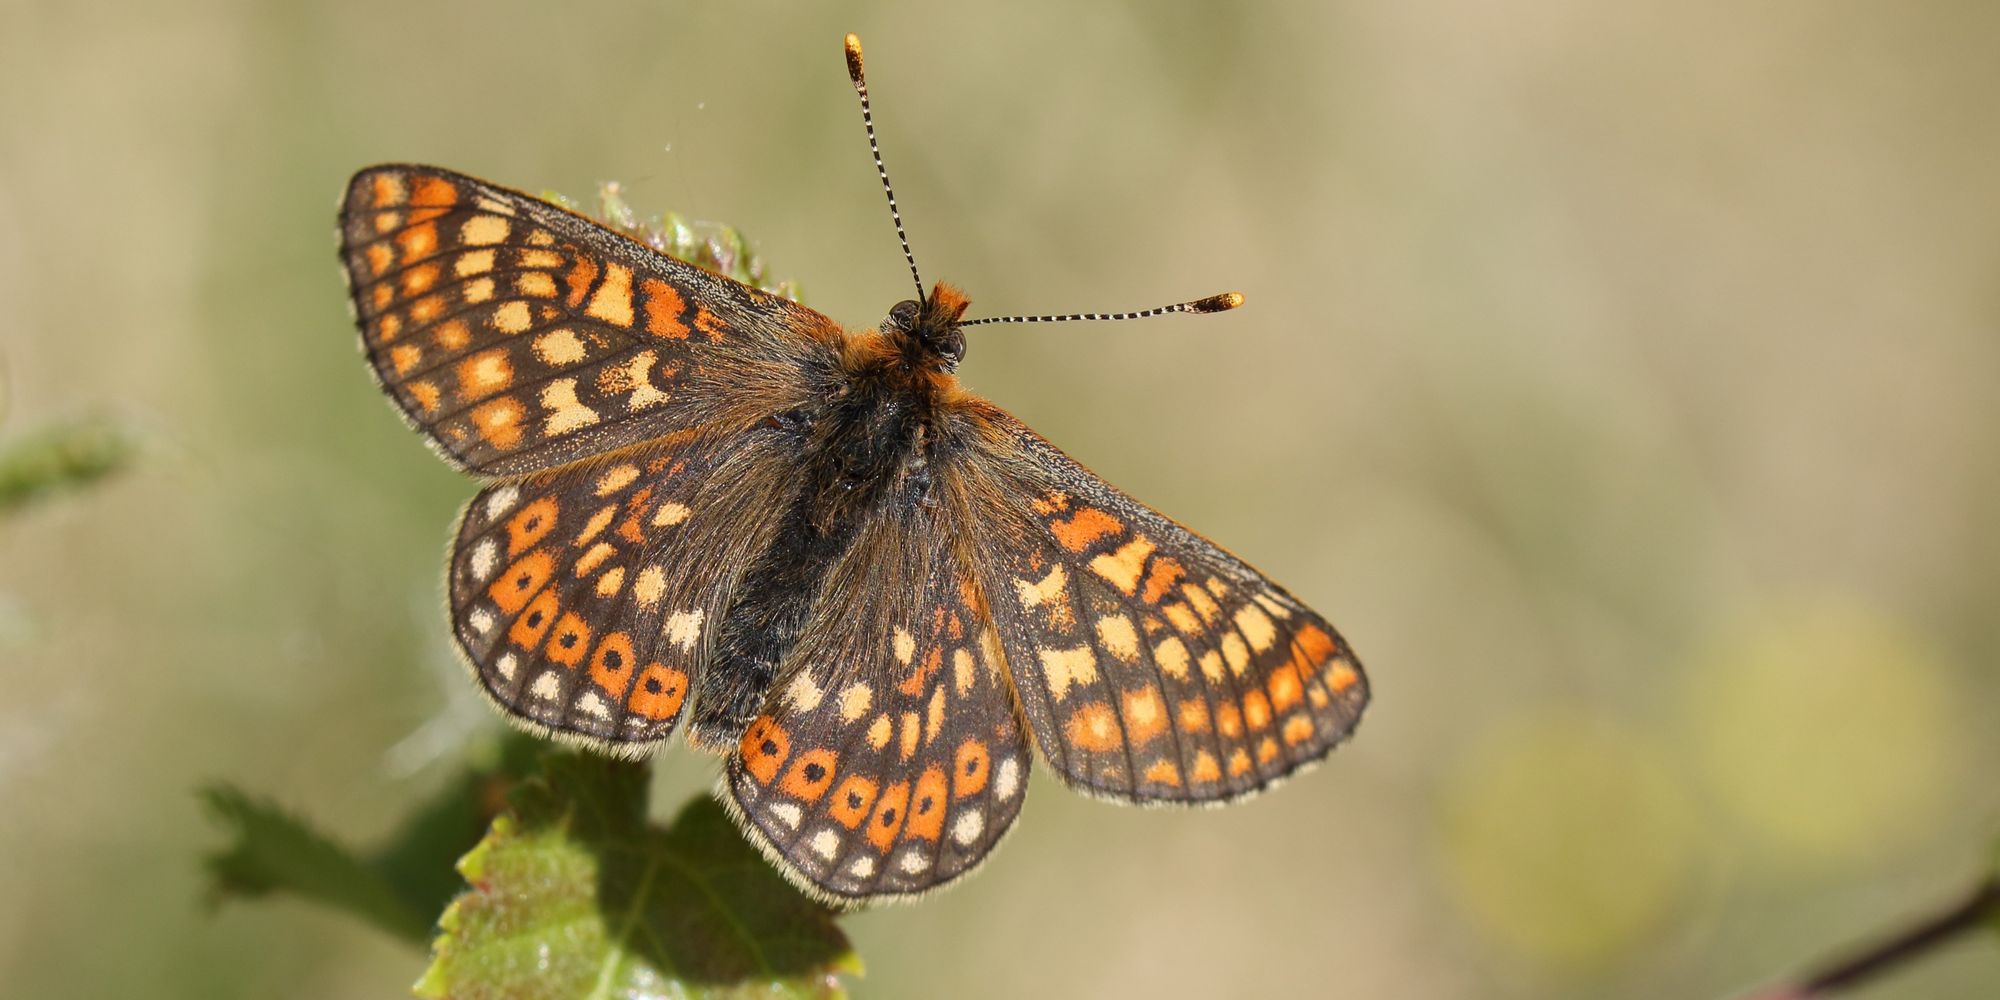 On Llantrisant Common, a butterfly took on the bureaucrats – and won